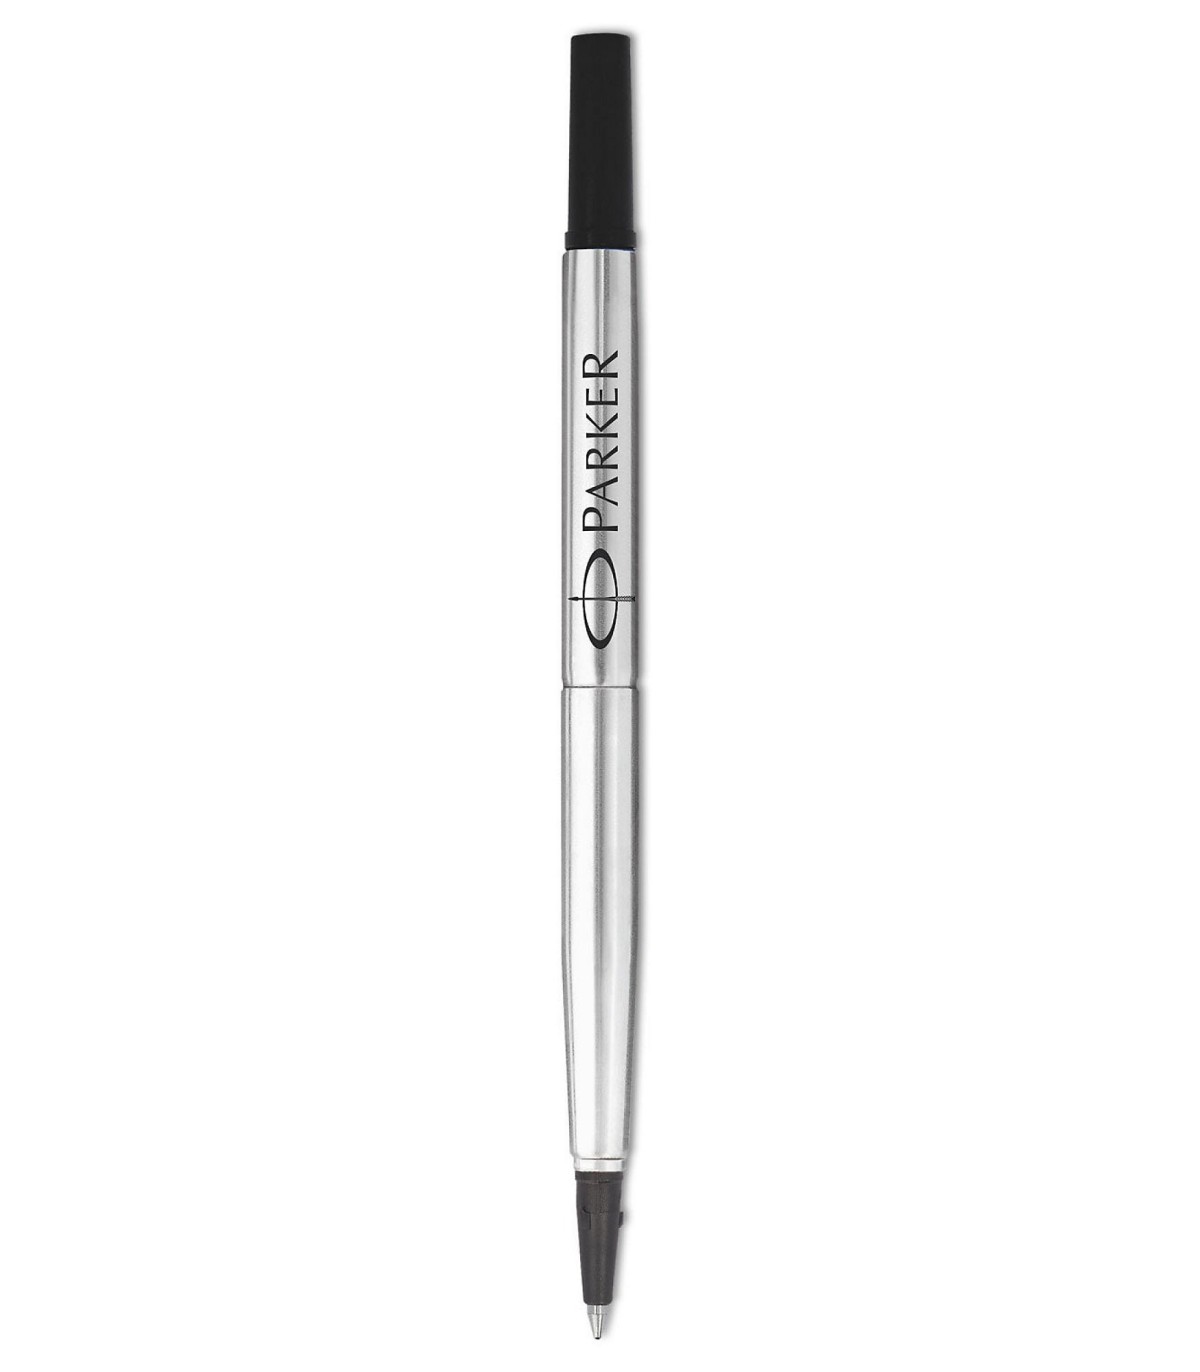 PARKER recharge Stylo Roller, pointe moyenne, noire, blister X 1